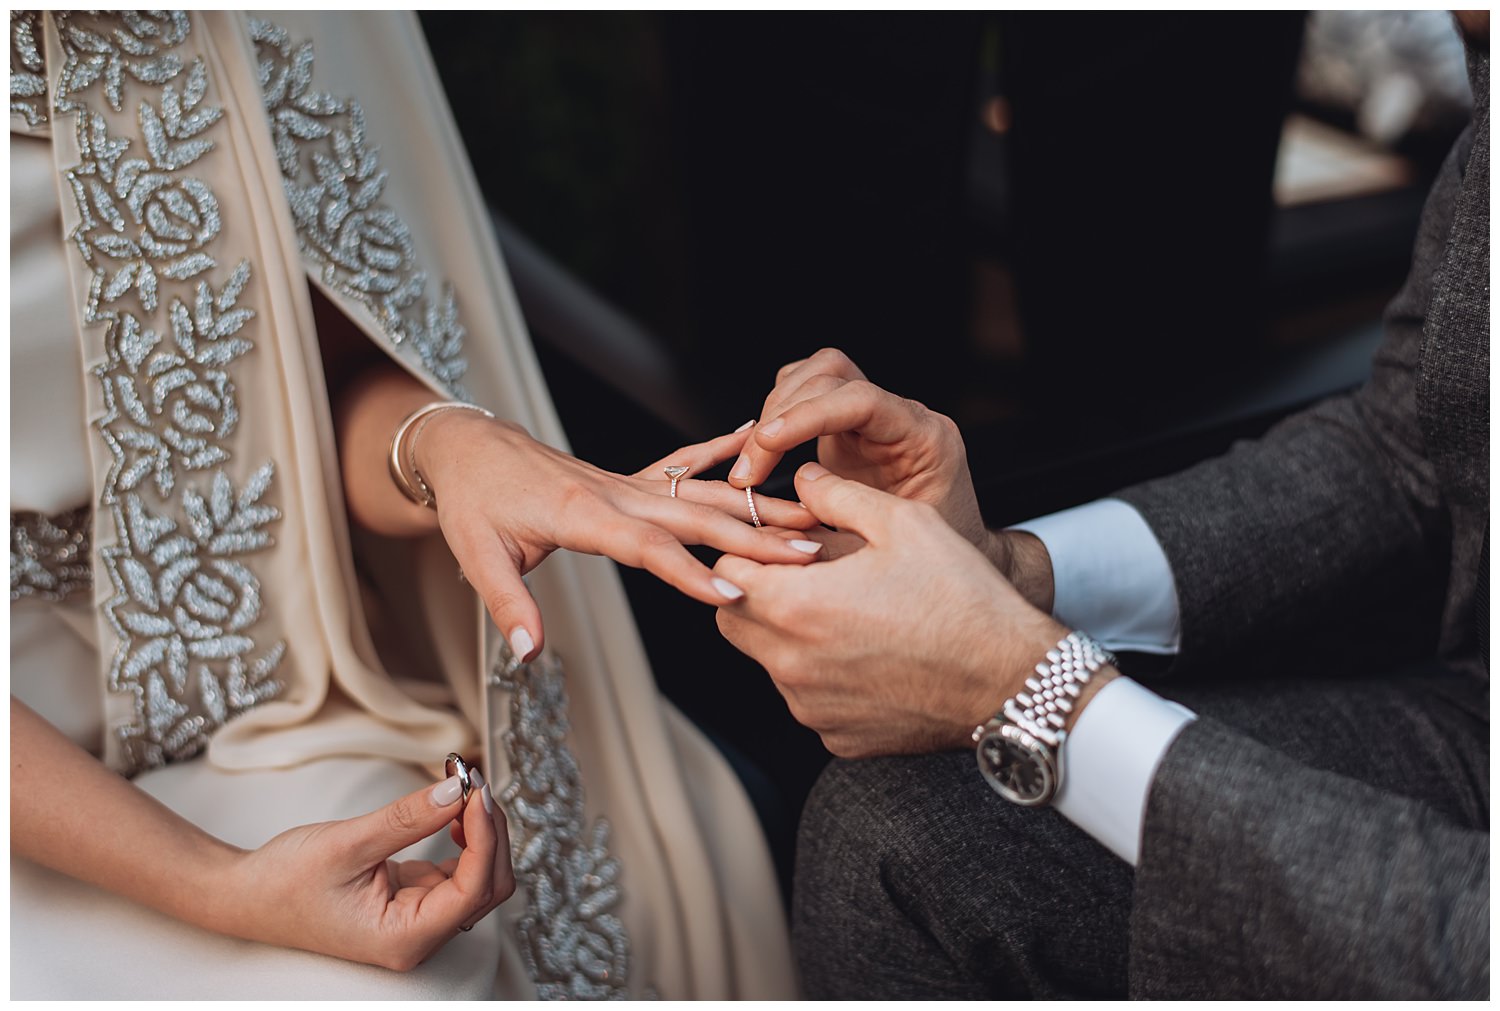 putting rings on during a wedding ceremony